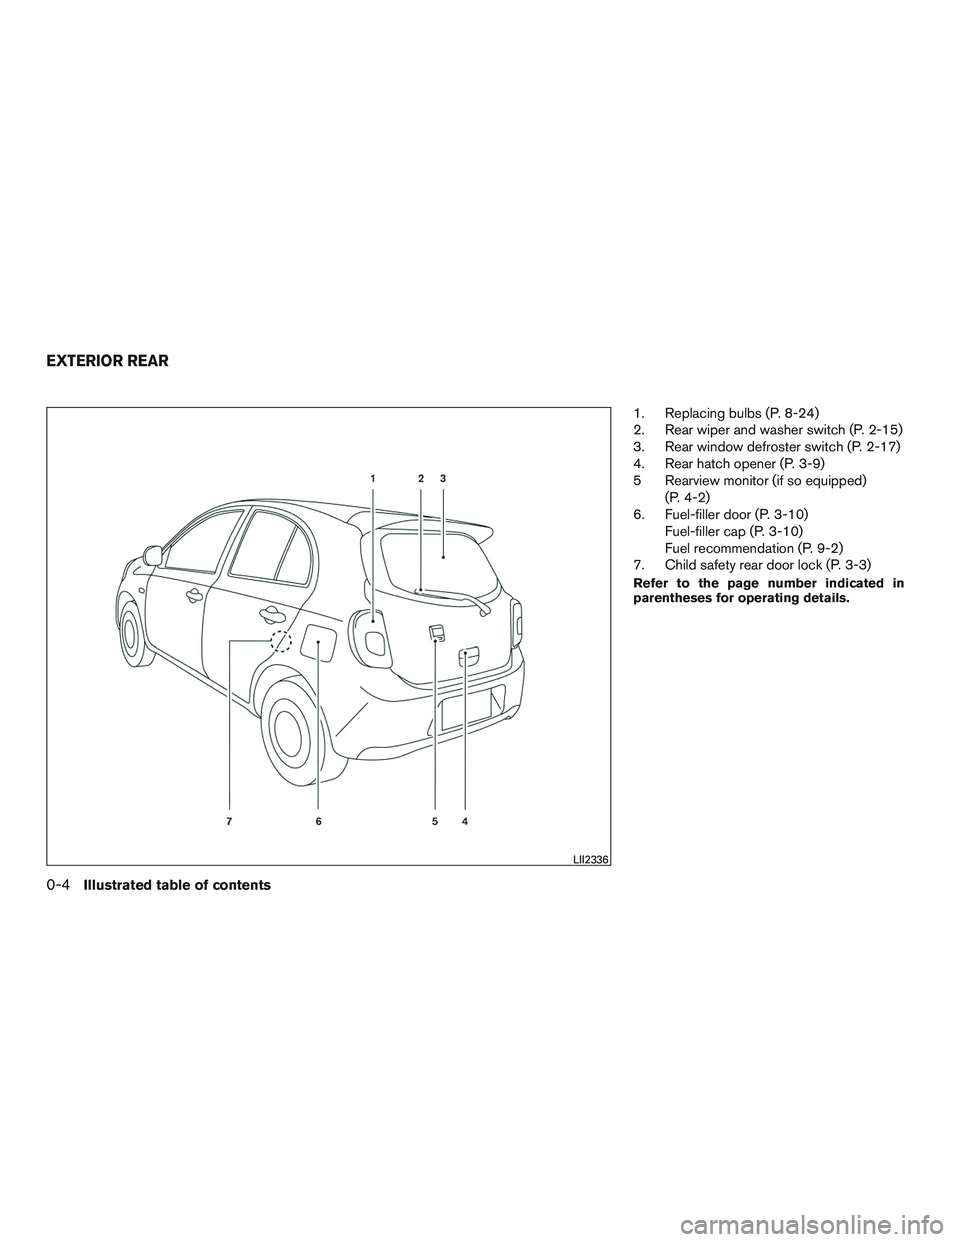 NISSAN MICRA 2016  Owner´s Manual 1. Replacing bulbs (P. 8-24)
2. Rear wiper and washer switch (P. 2-15)
3. Rear window defroster switch (P. 2-17)
4. Rear hatch opener (P. 3-9)
5 Rearview monitor (if so equipped)(P. 4-2)
6. Fuel-fille